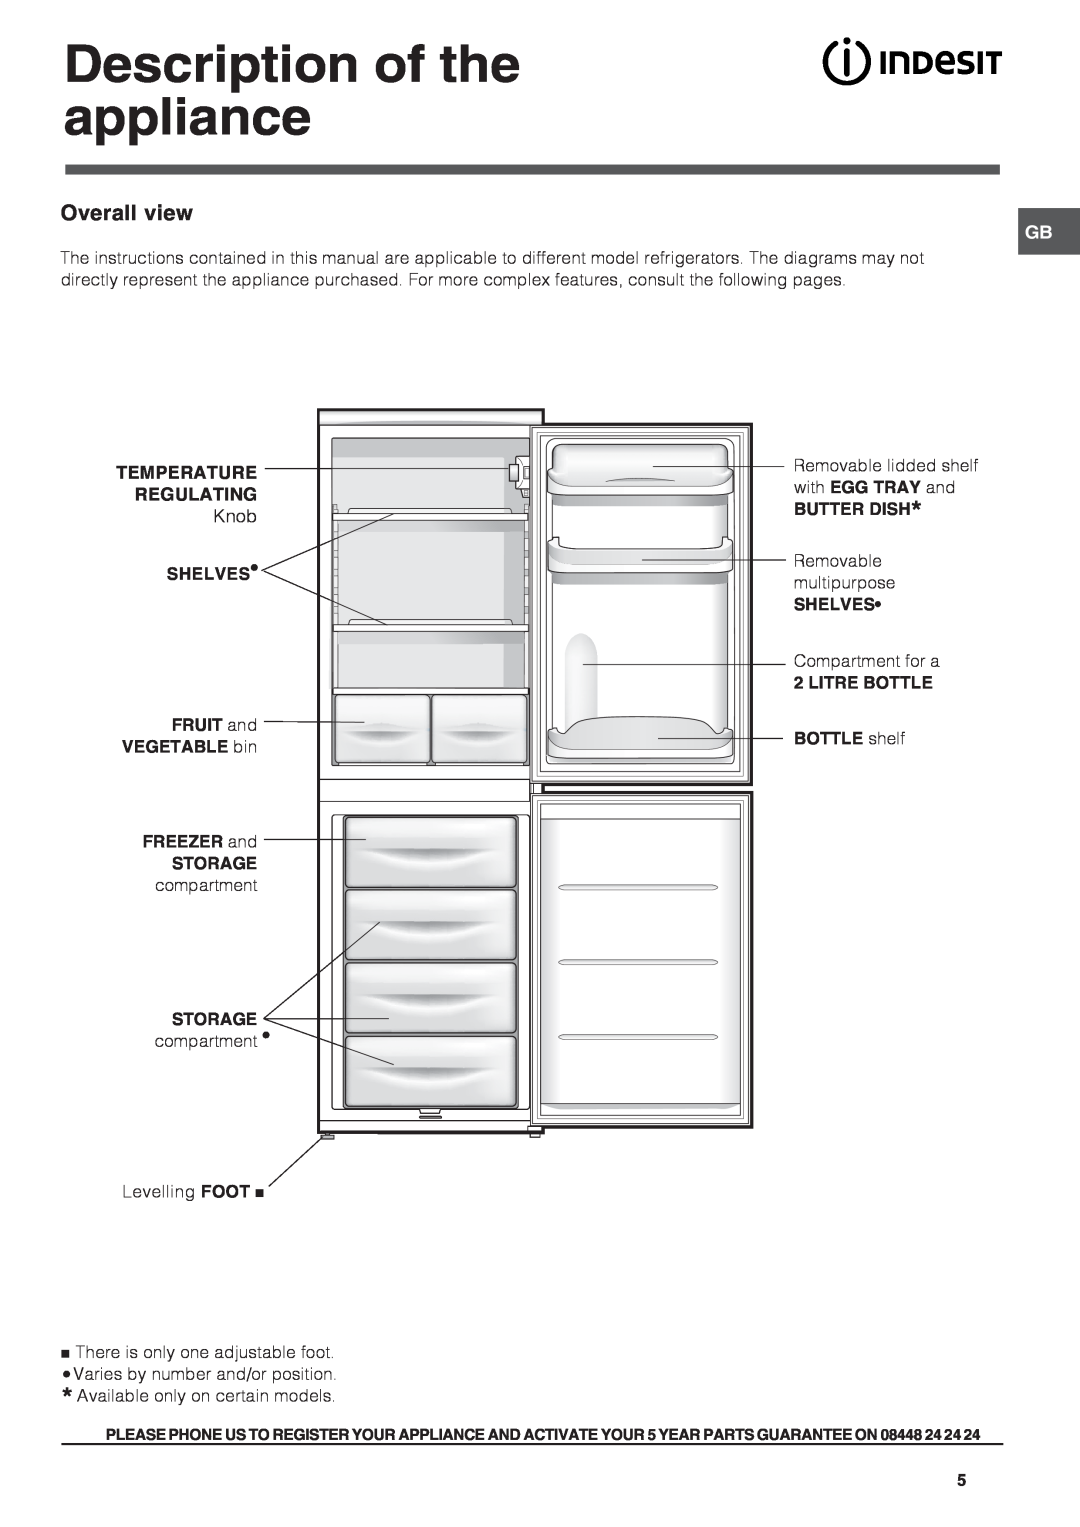 Indesit CAA 55 XX Description of the appliance, Overall view, Temperature Regulating, STORAGE compartment, Butter Dish 